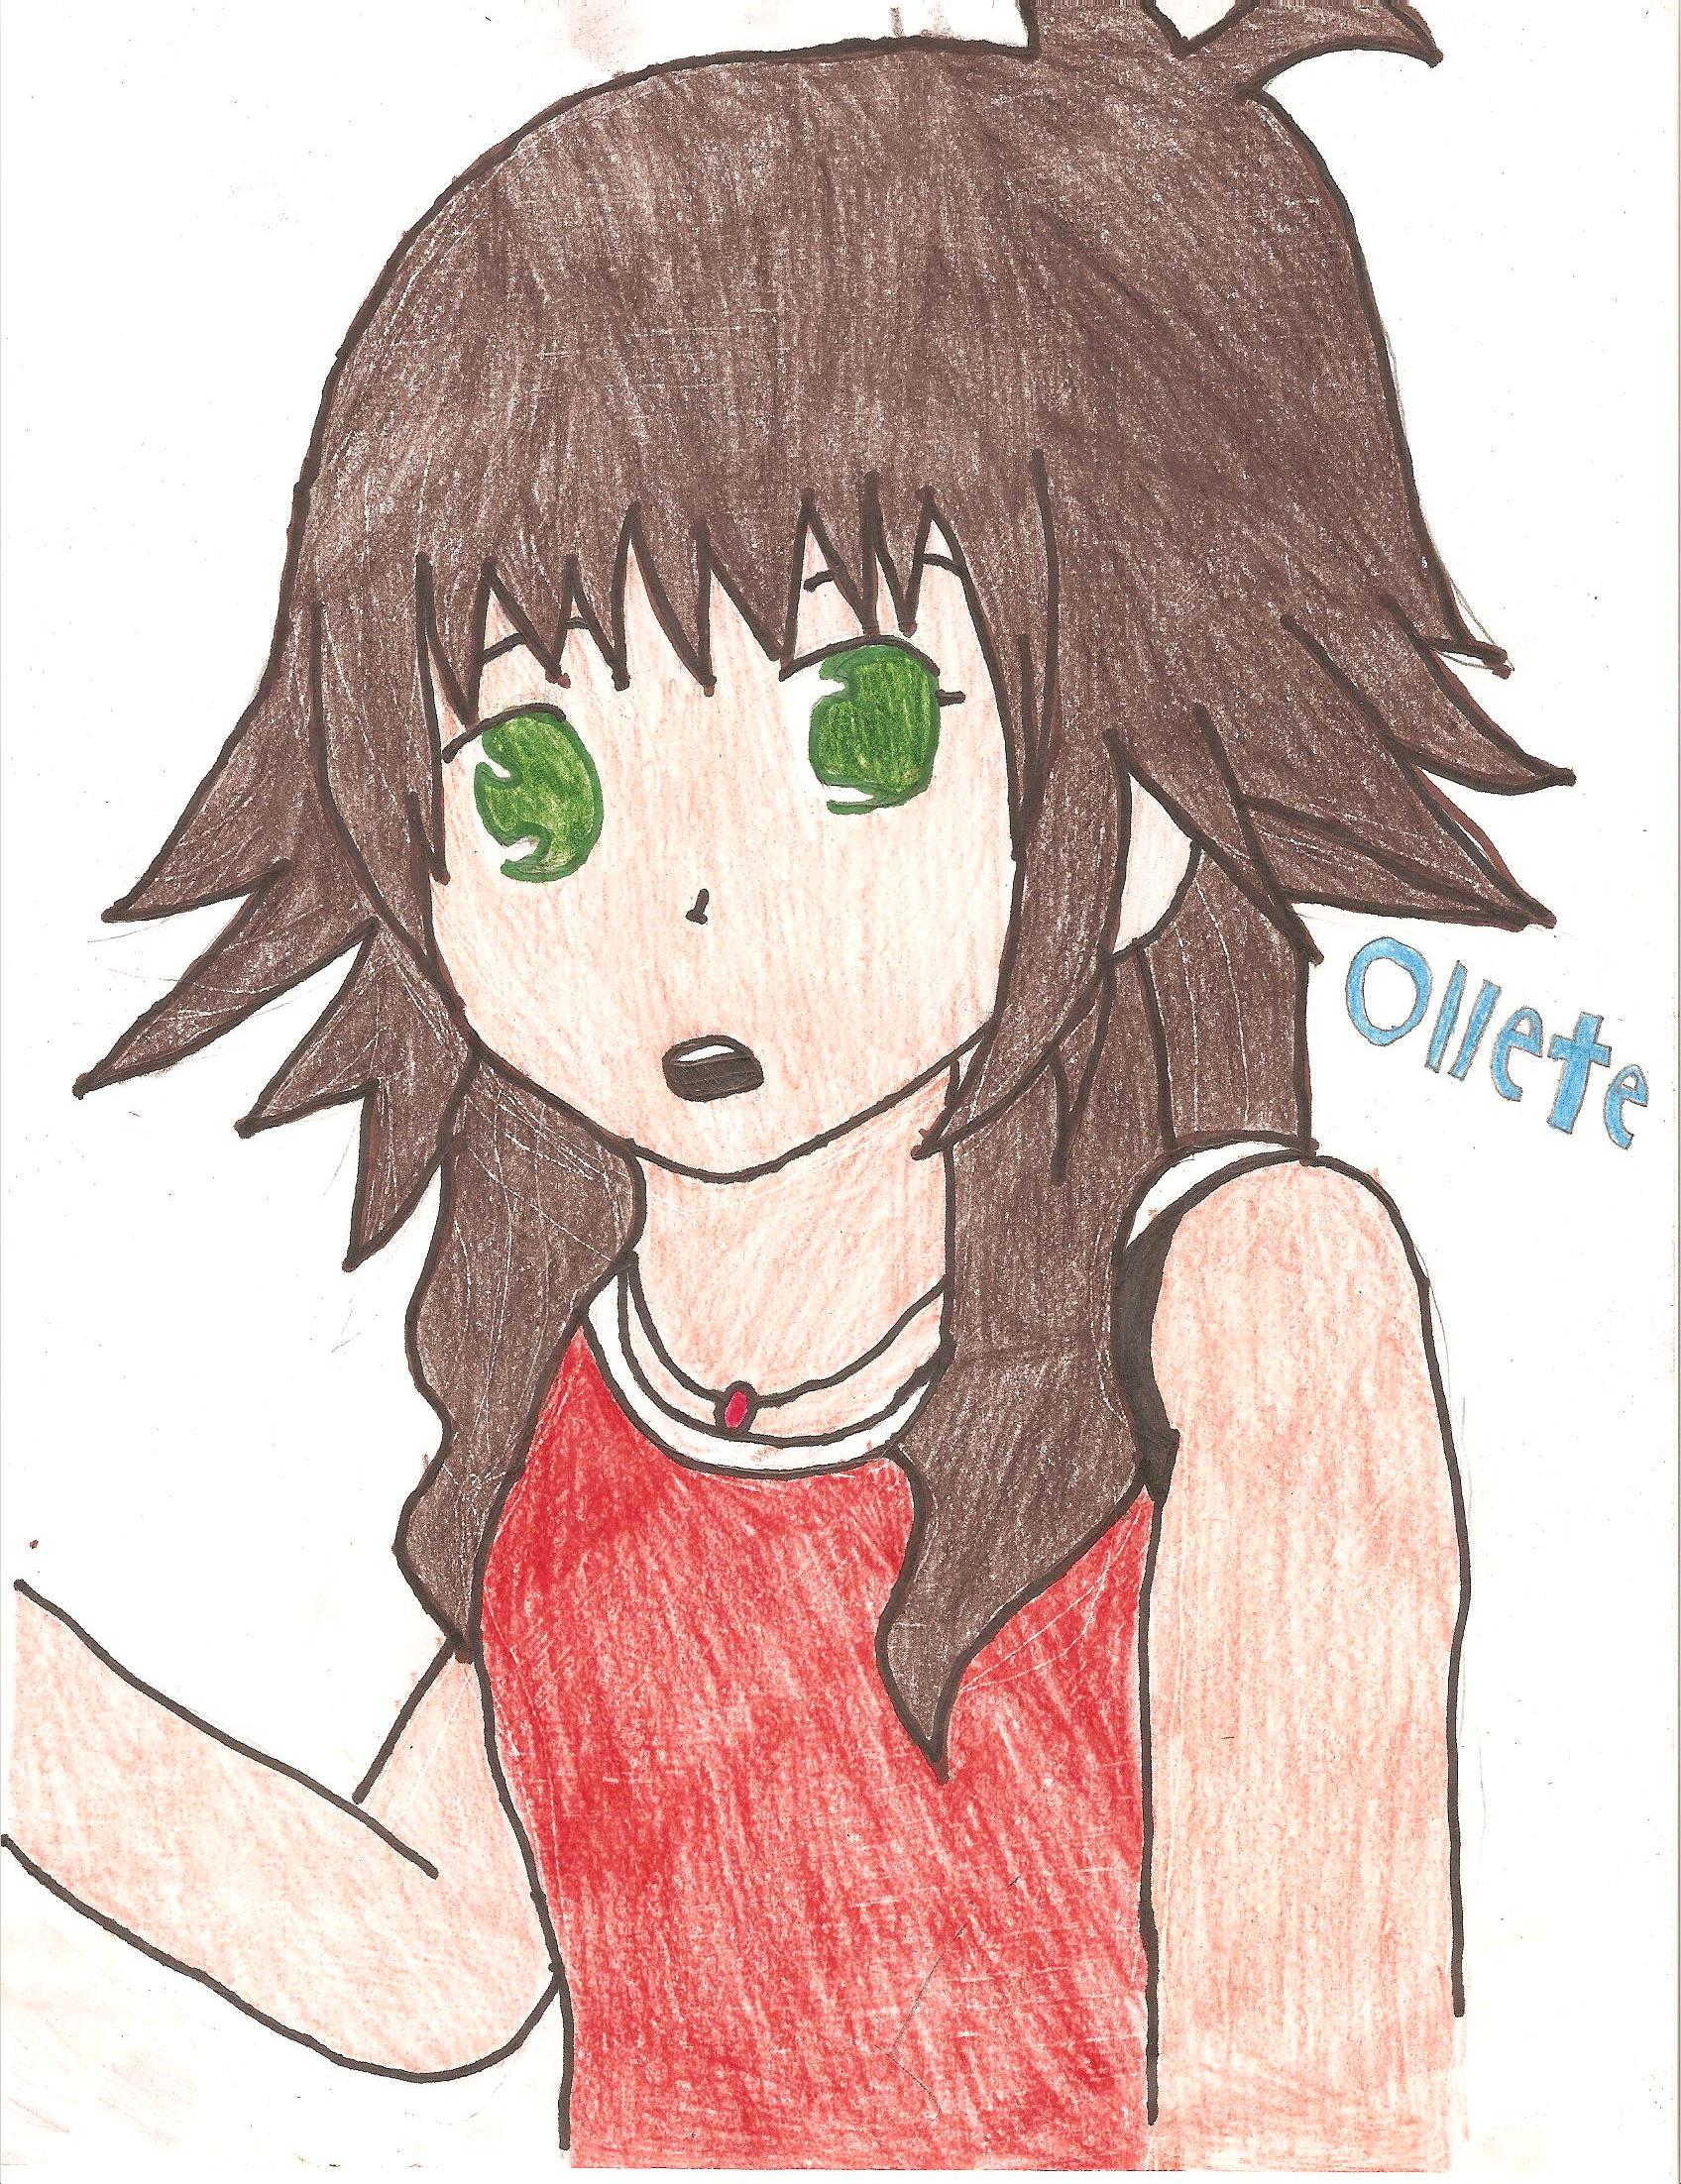 Ollete by jessica33366644